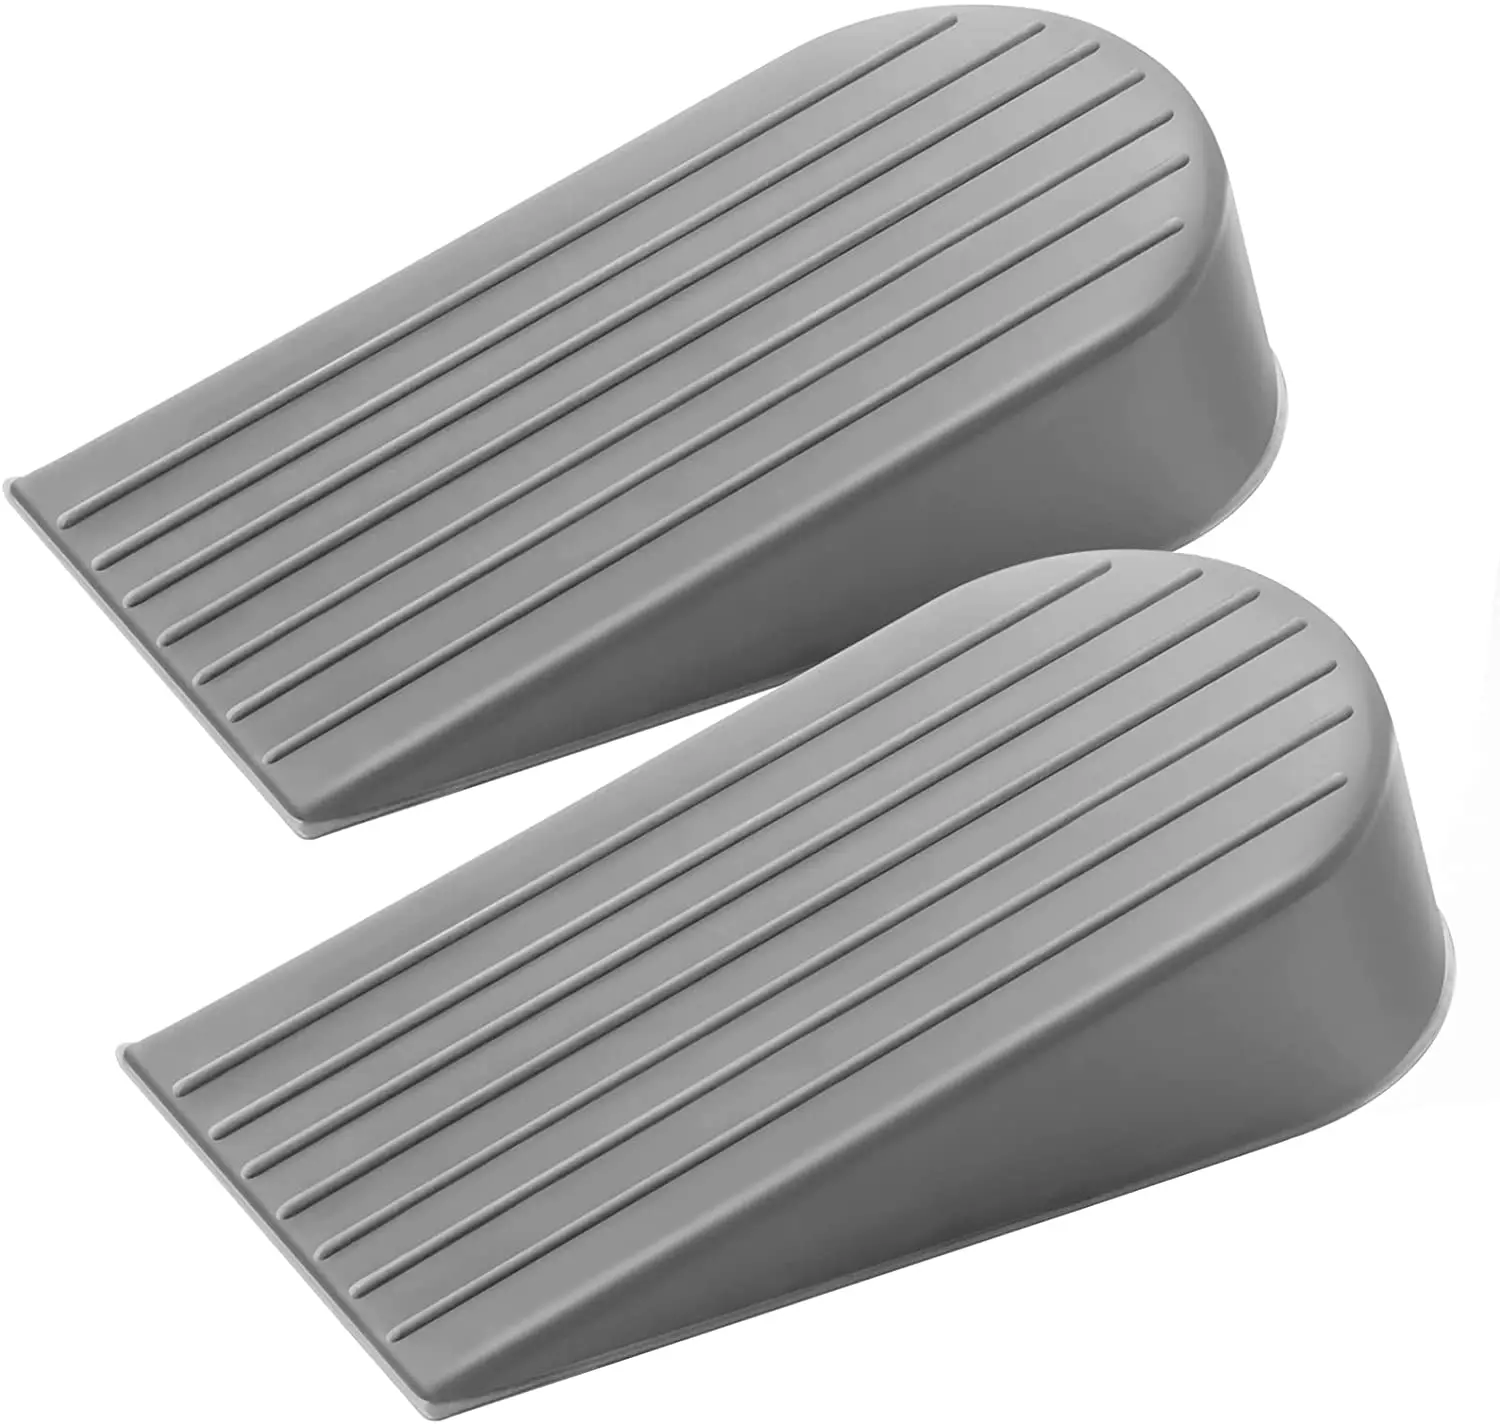 Superior Quality Grey Rubber Door Wedge Stop Only £1.20 